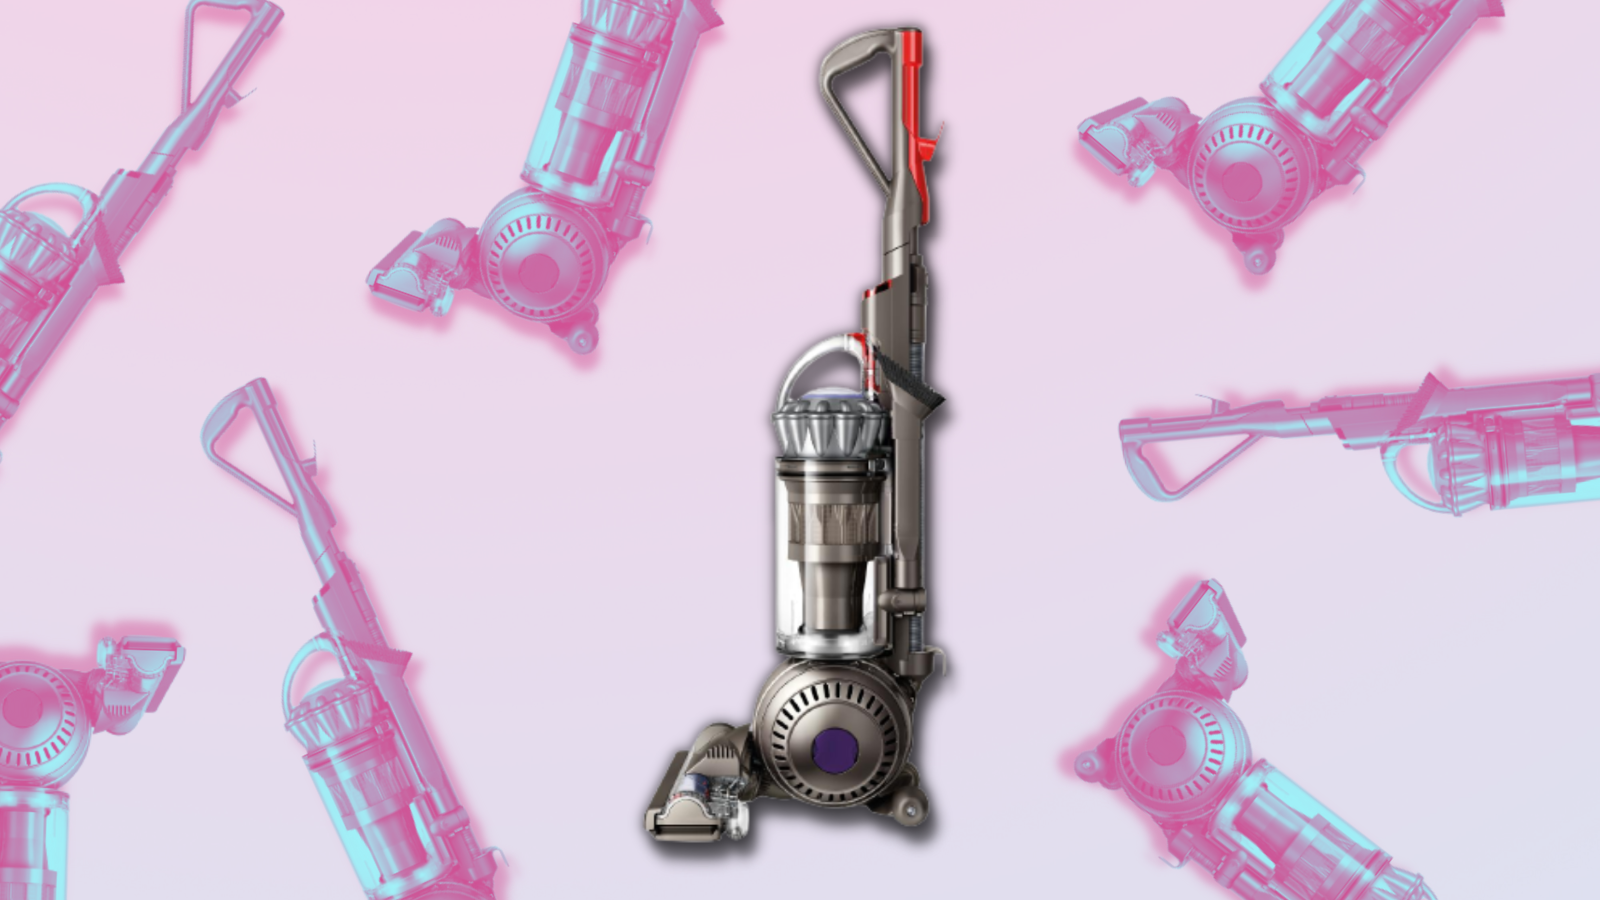 dyson animal ball 2 upright vacuum in center with muted color vacuums in the background